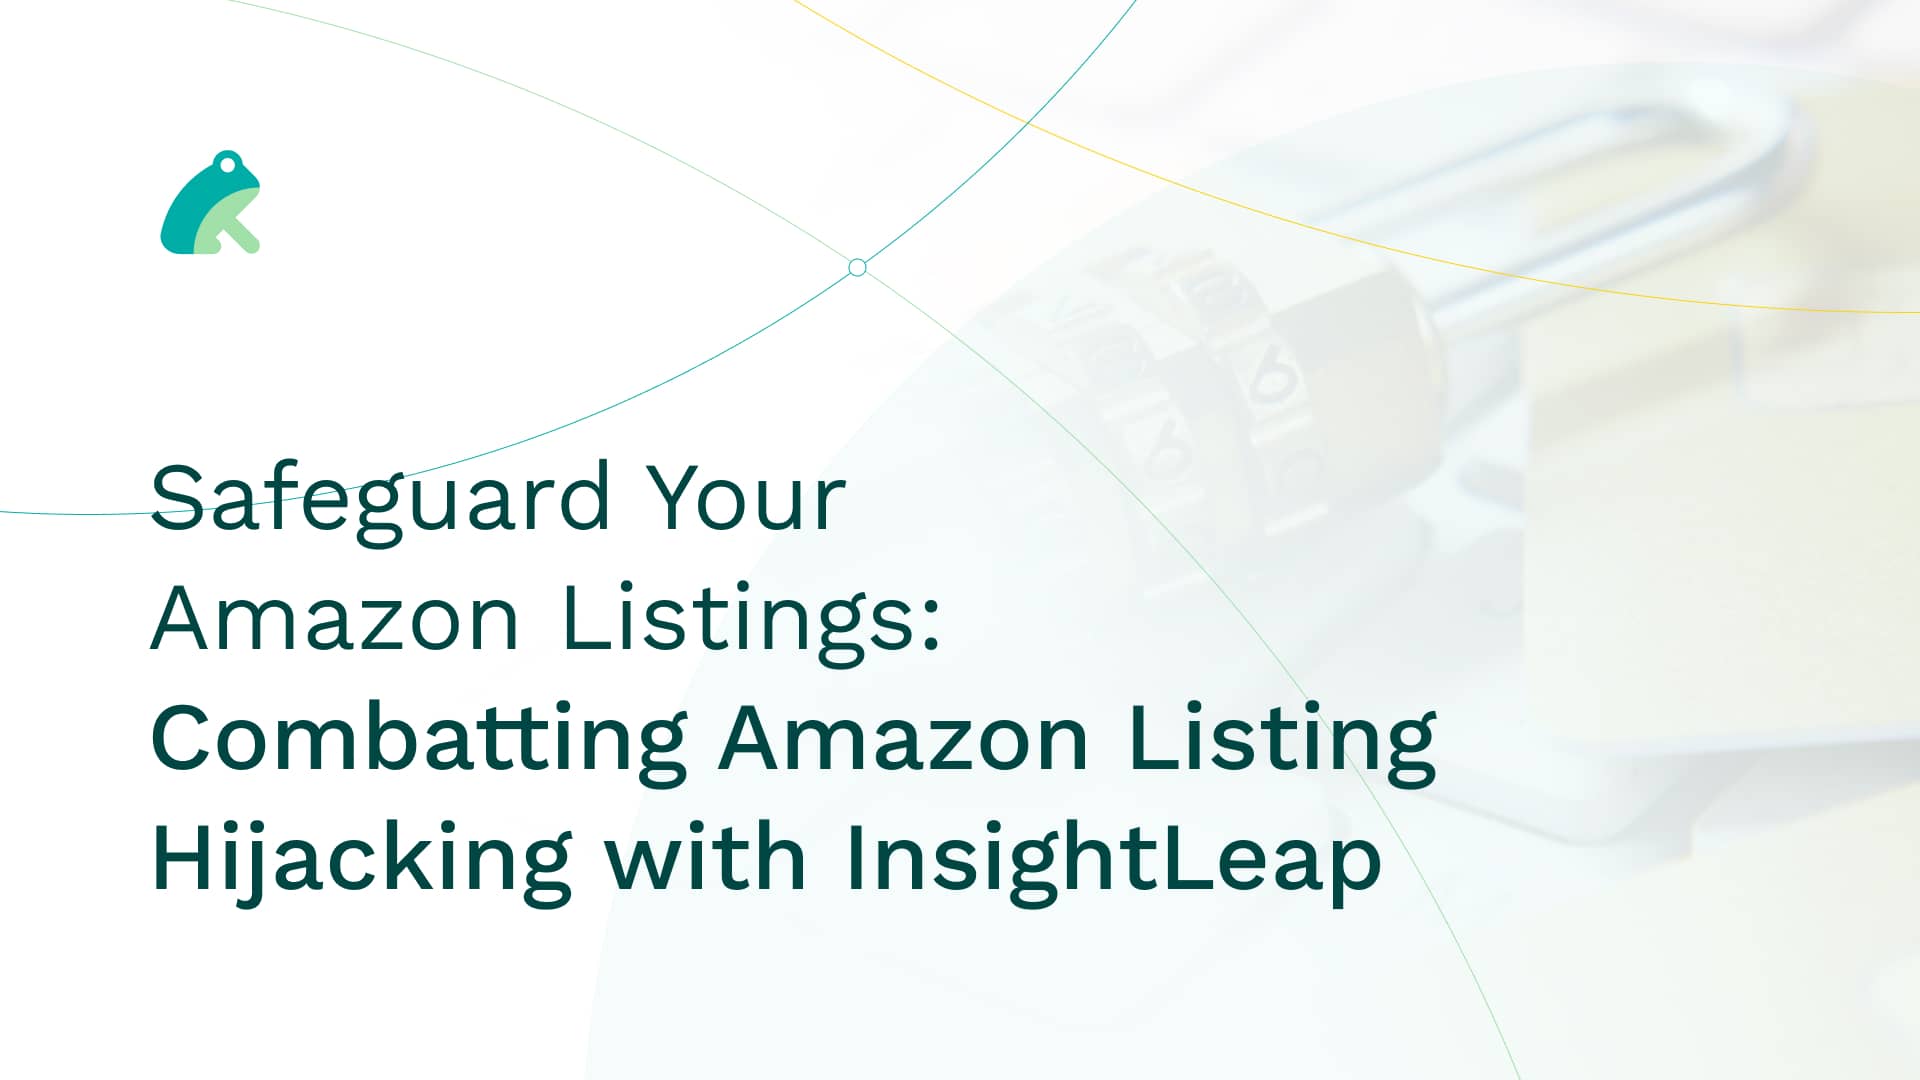 Safeguard Your Amazon Listings: Combatting Amazon Listing Hijacking with InsightLeap